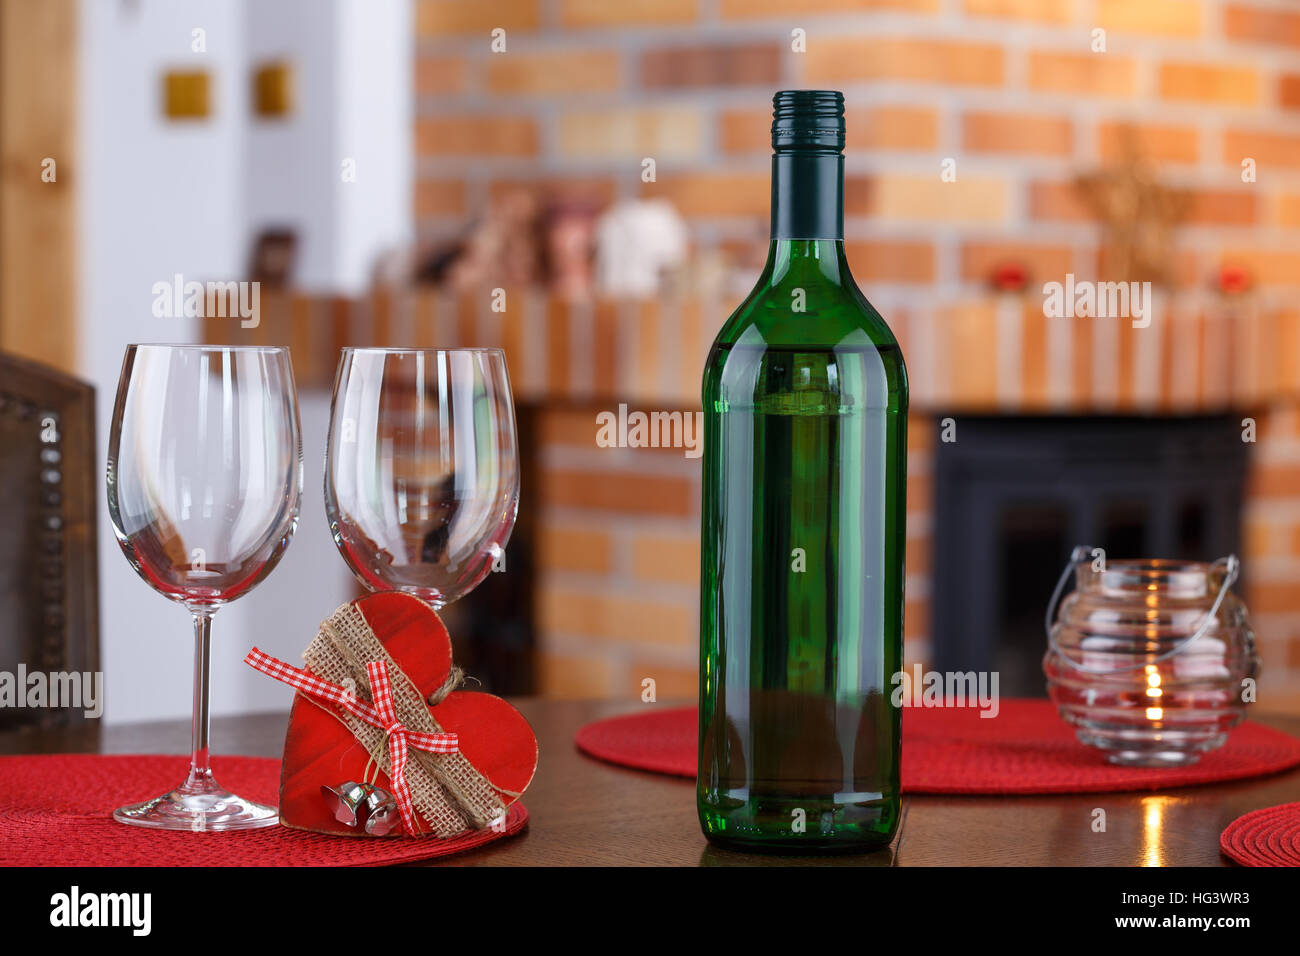 Still life with wine bottles, glasses and heart symbol, on the background a brick fireplace Stock Photo